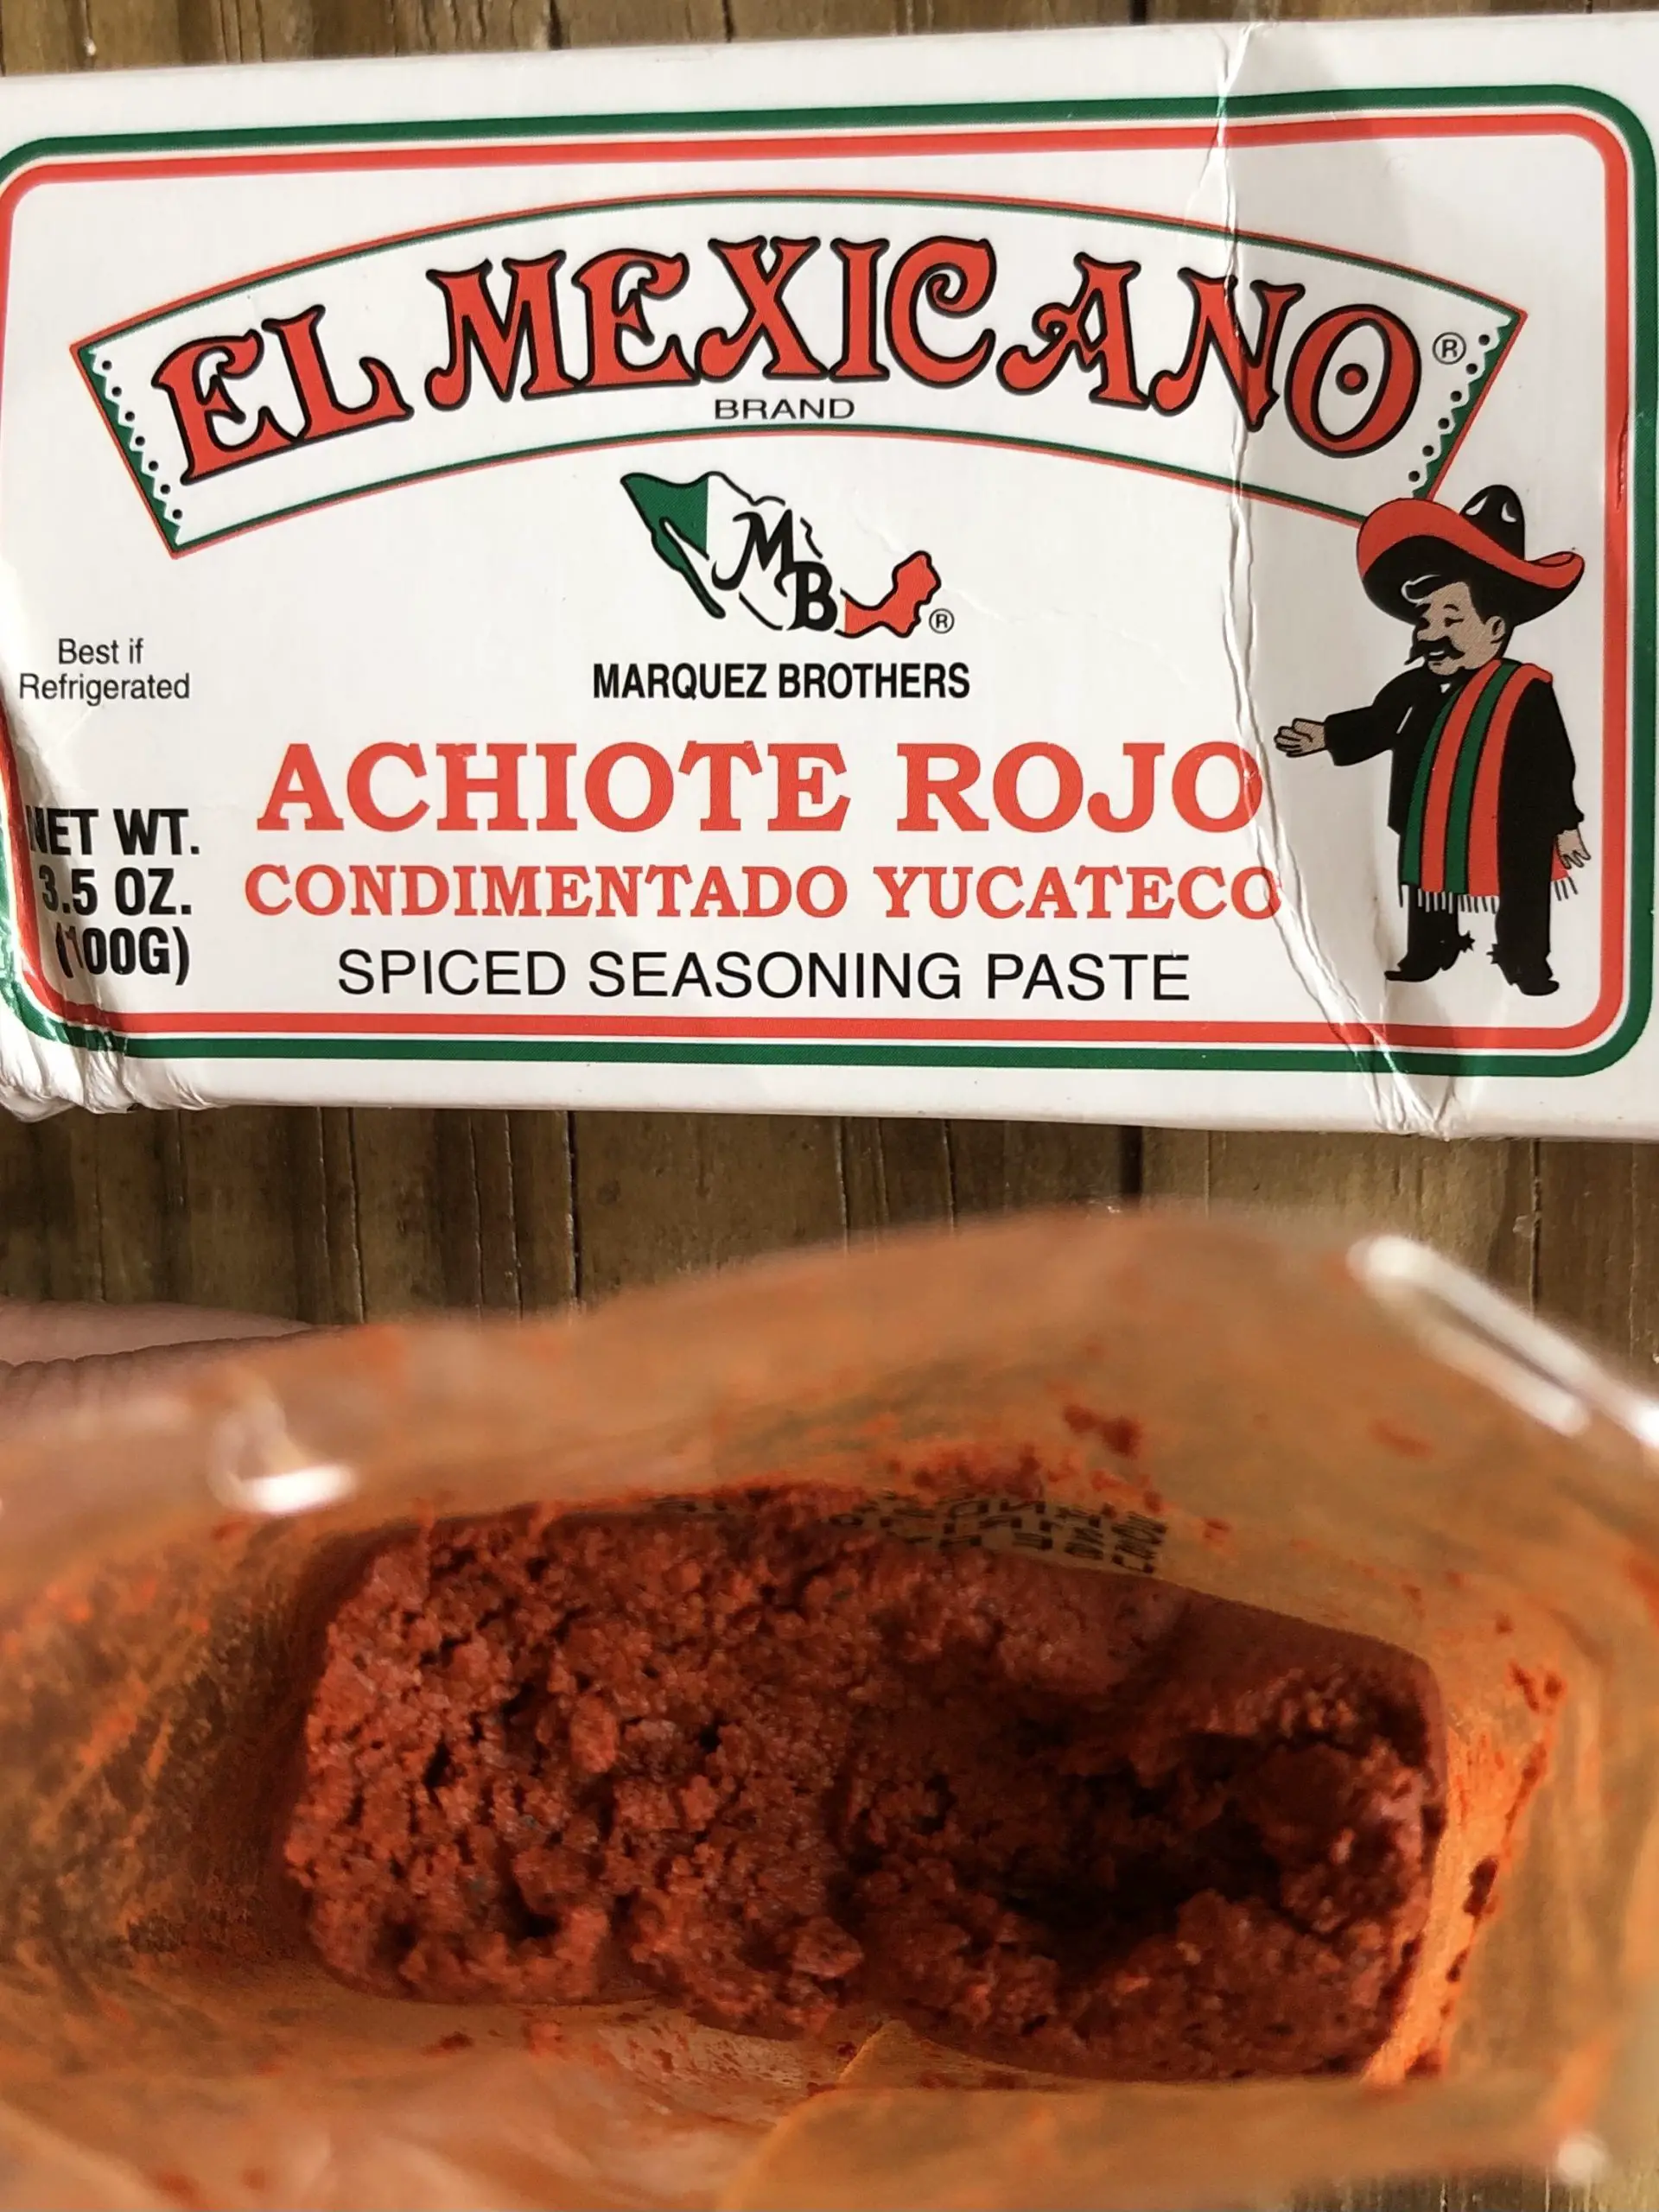 Achiote Rojo Paste El Mexicano Package and a view of the seasoning paste